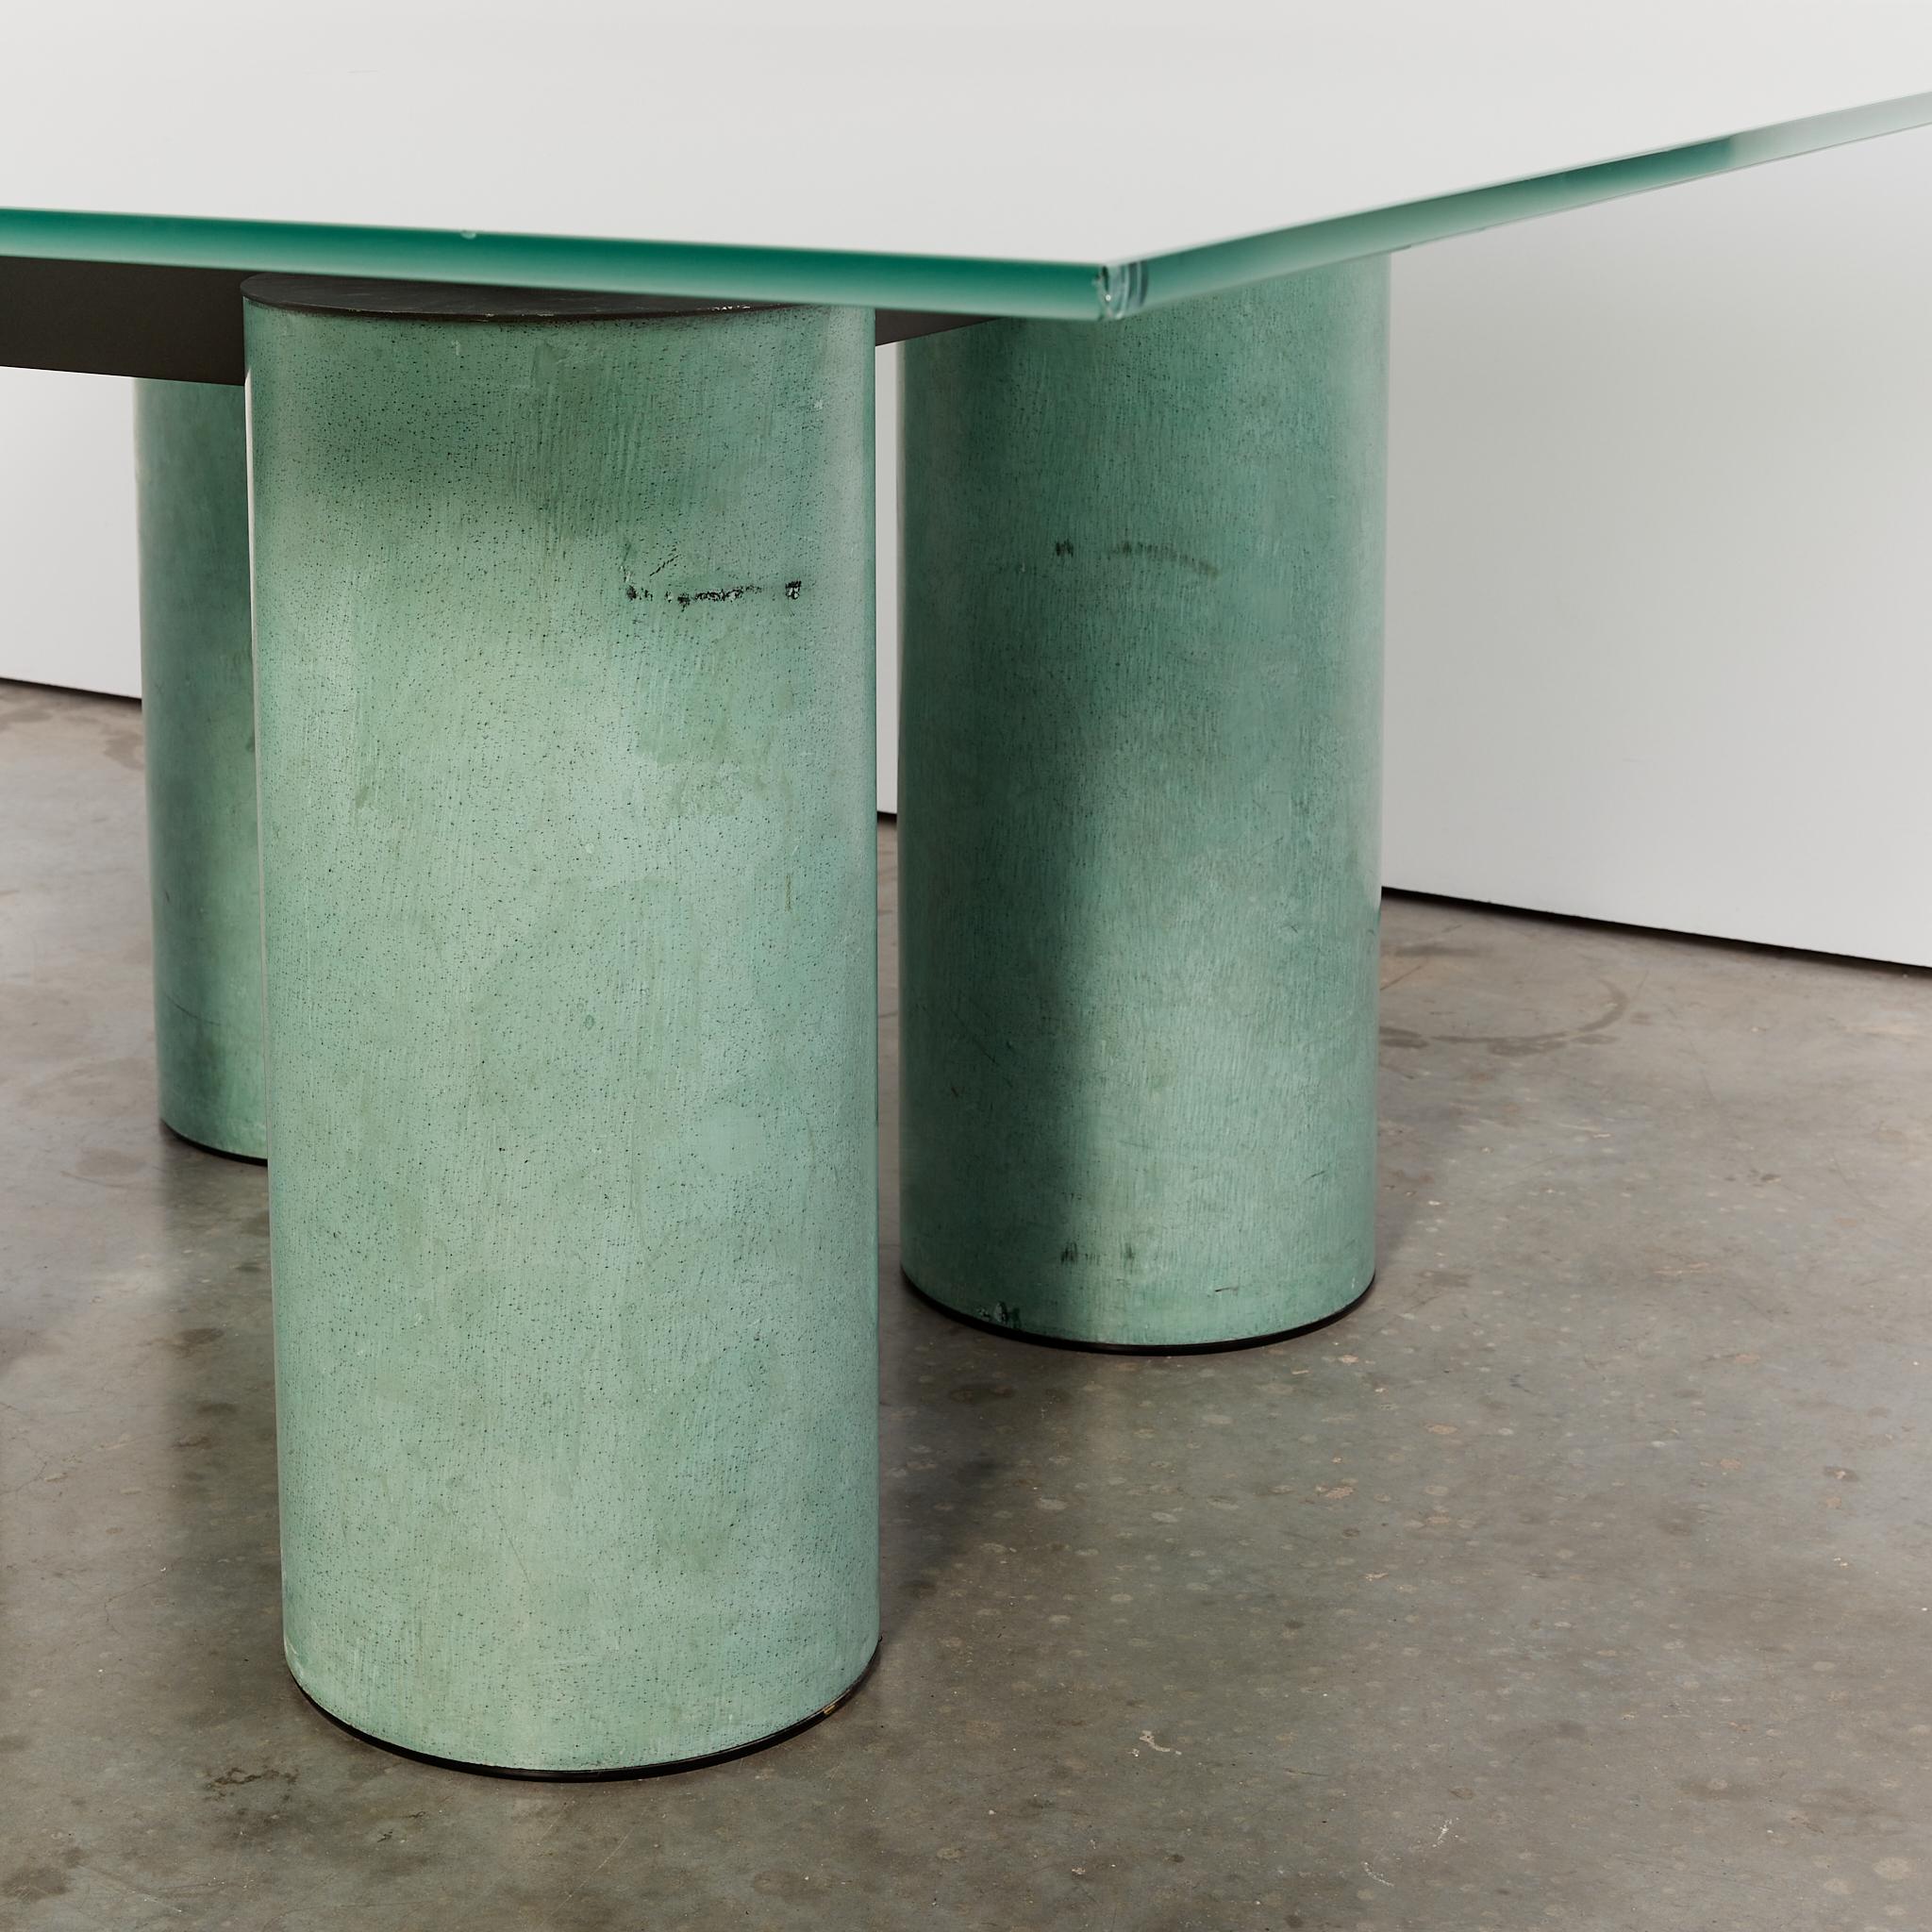 Serenissimo board room / XL dining table by Massimo & Lella Vignelli for Acerbis For Sale 1